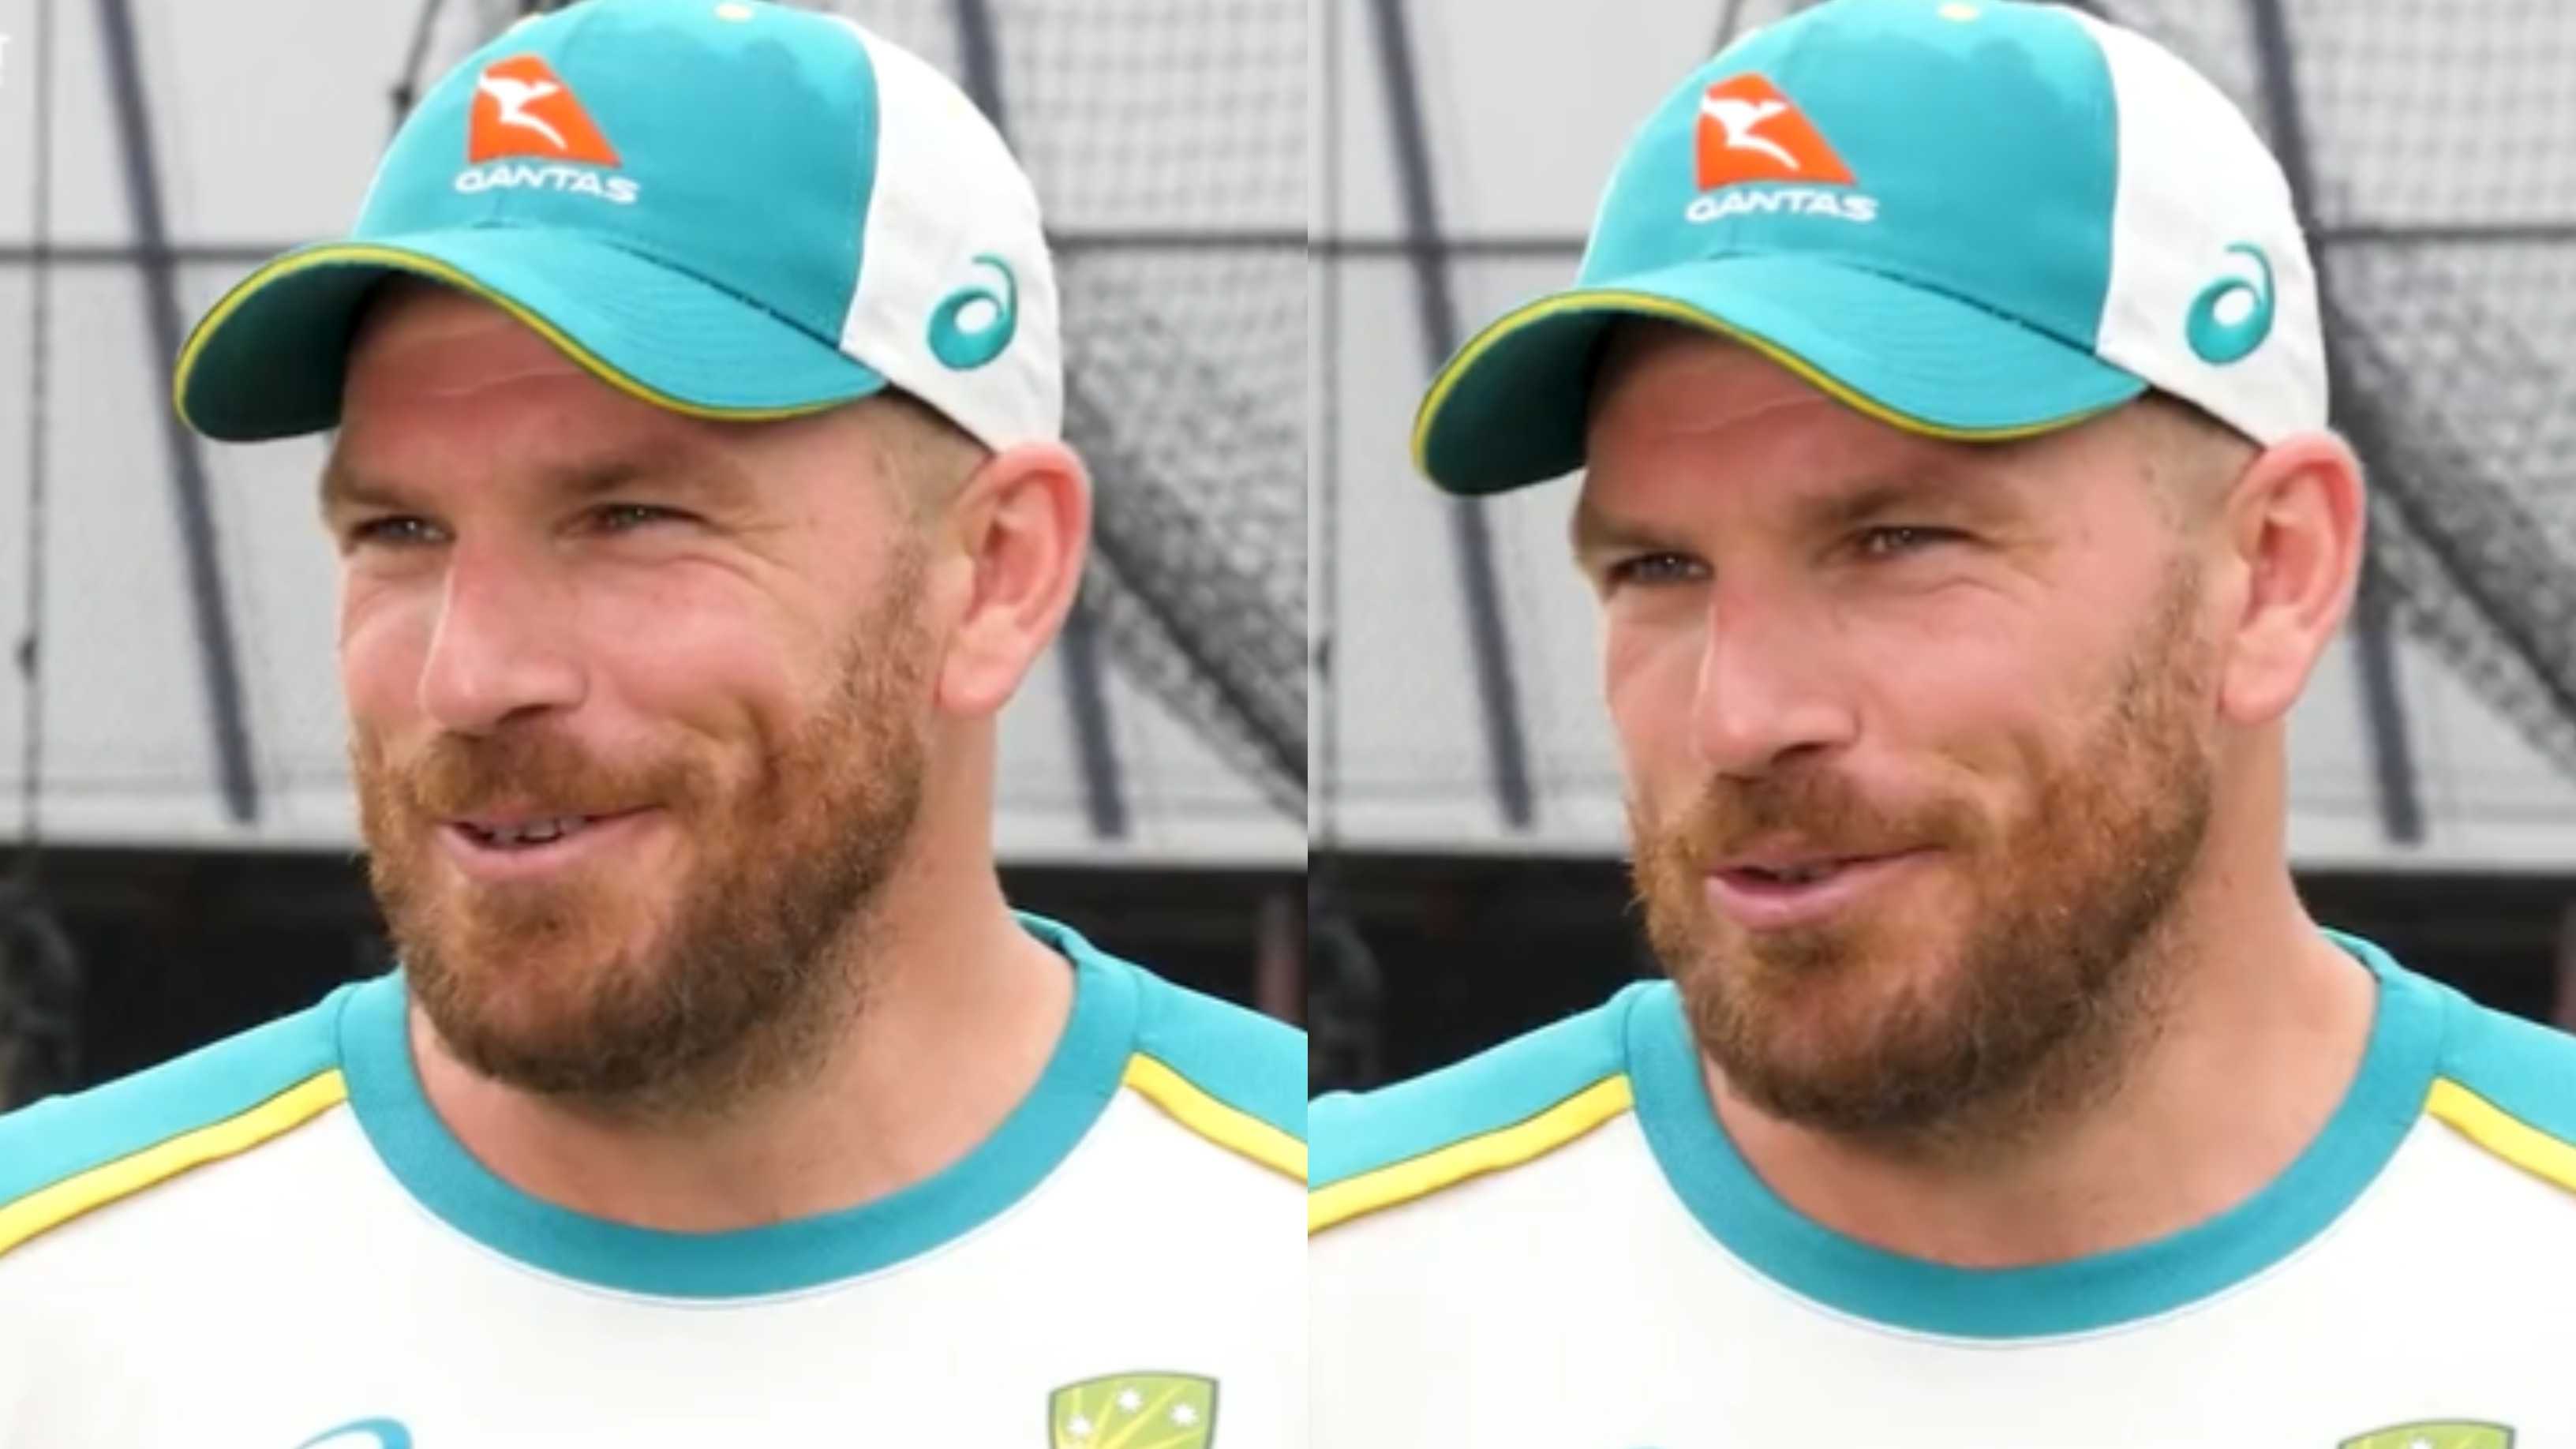 IPL 2022: WATCH – ‘There’s one team I’m missing a shirt from’, says Finch as he gears up to play for his 9th IPL team